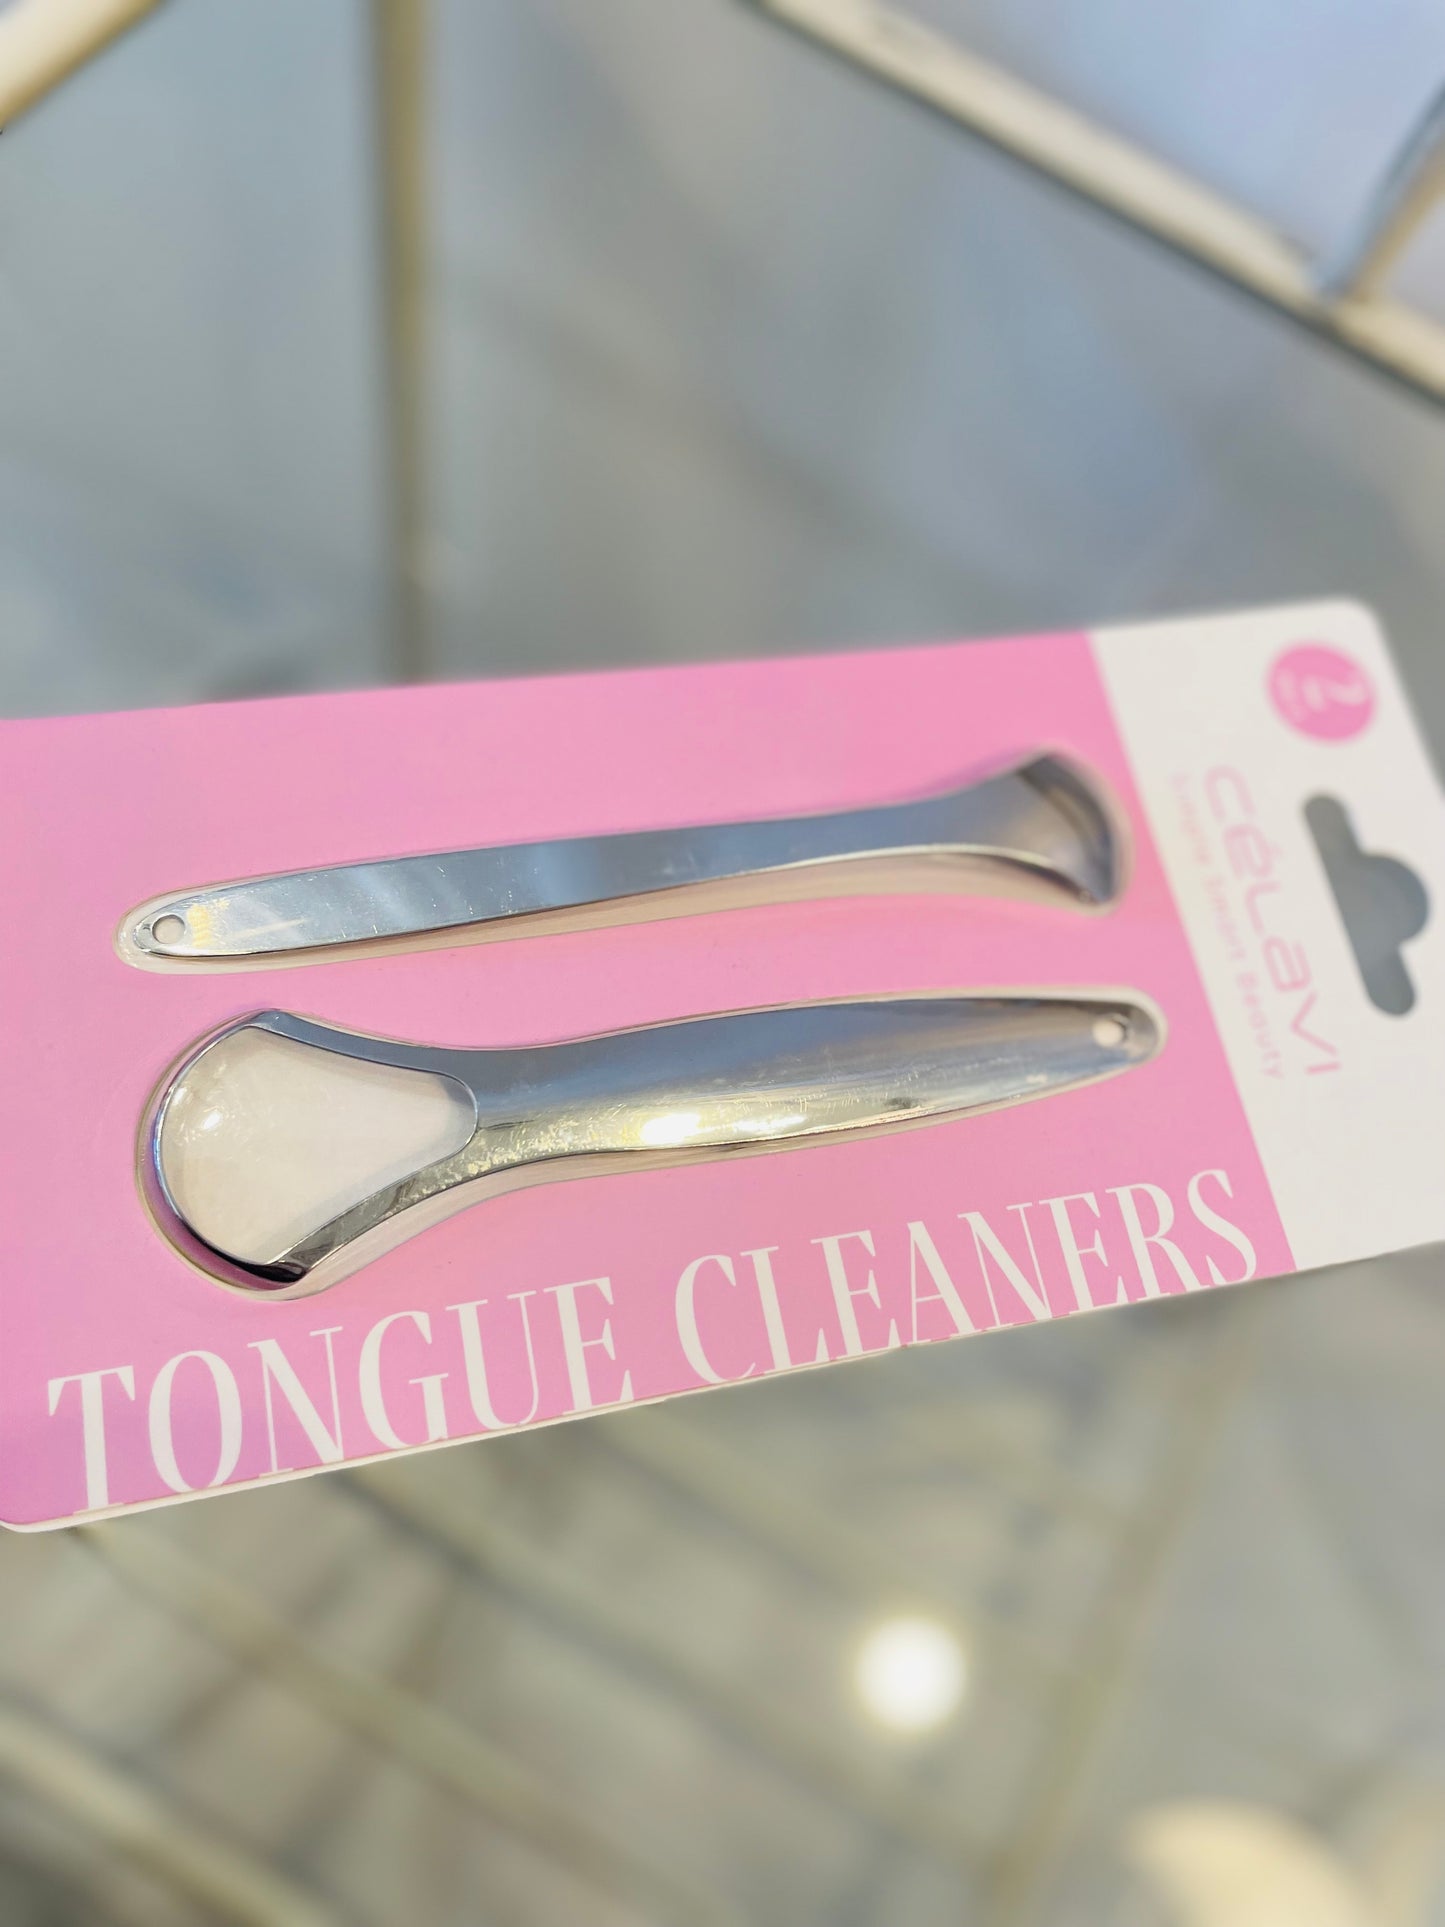 Tongue cleaners